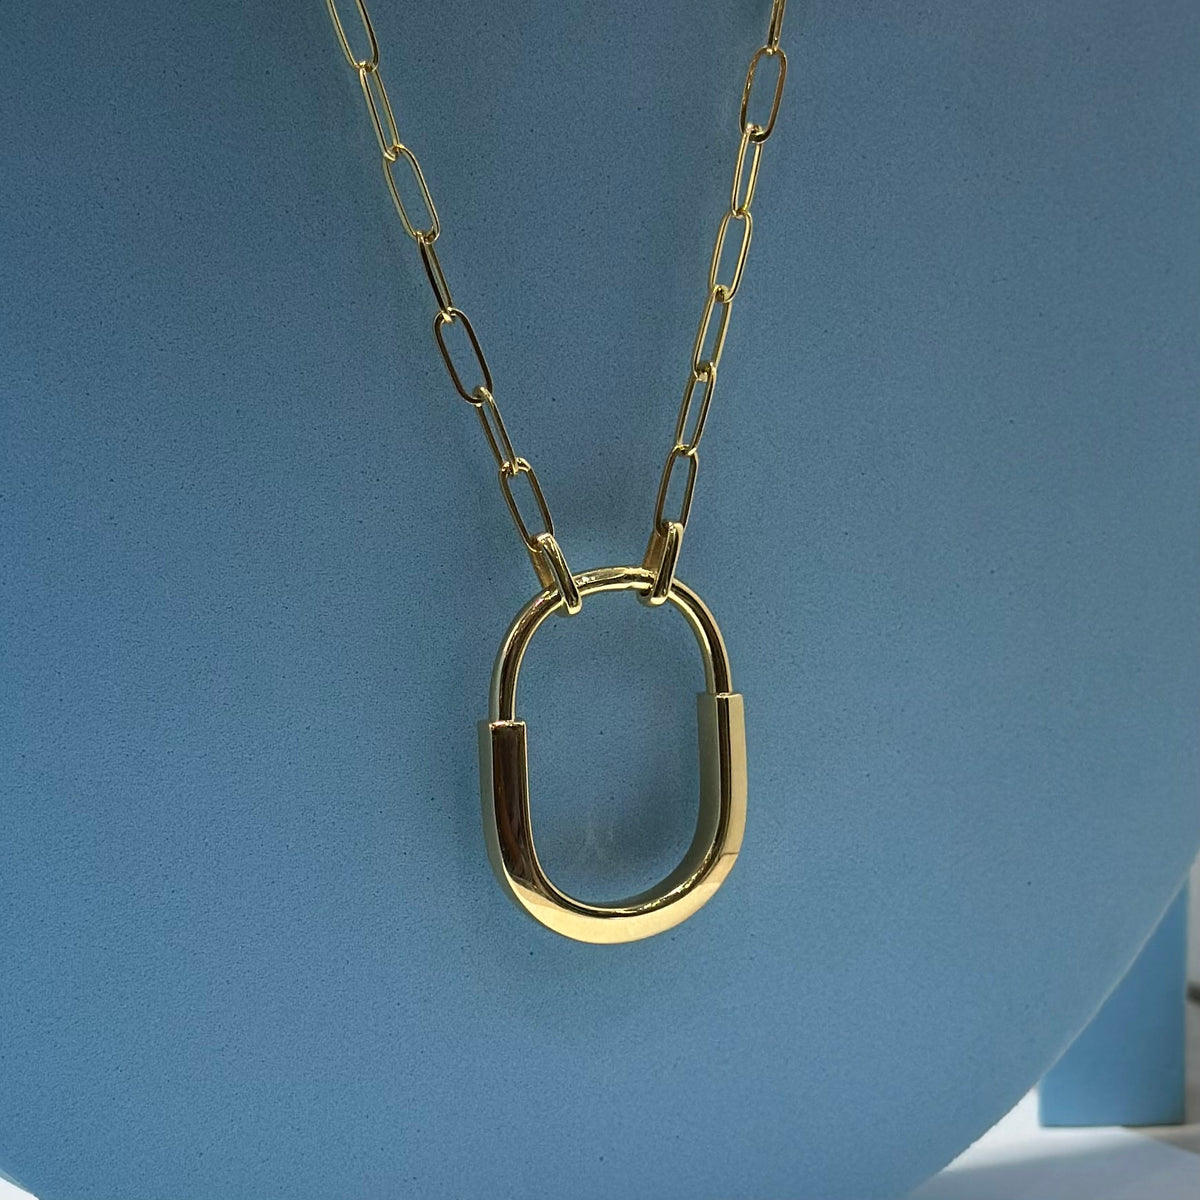 Real 18K Yellow Gold - SJTFNY Lock Necklace